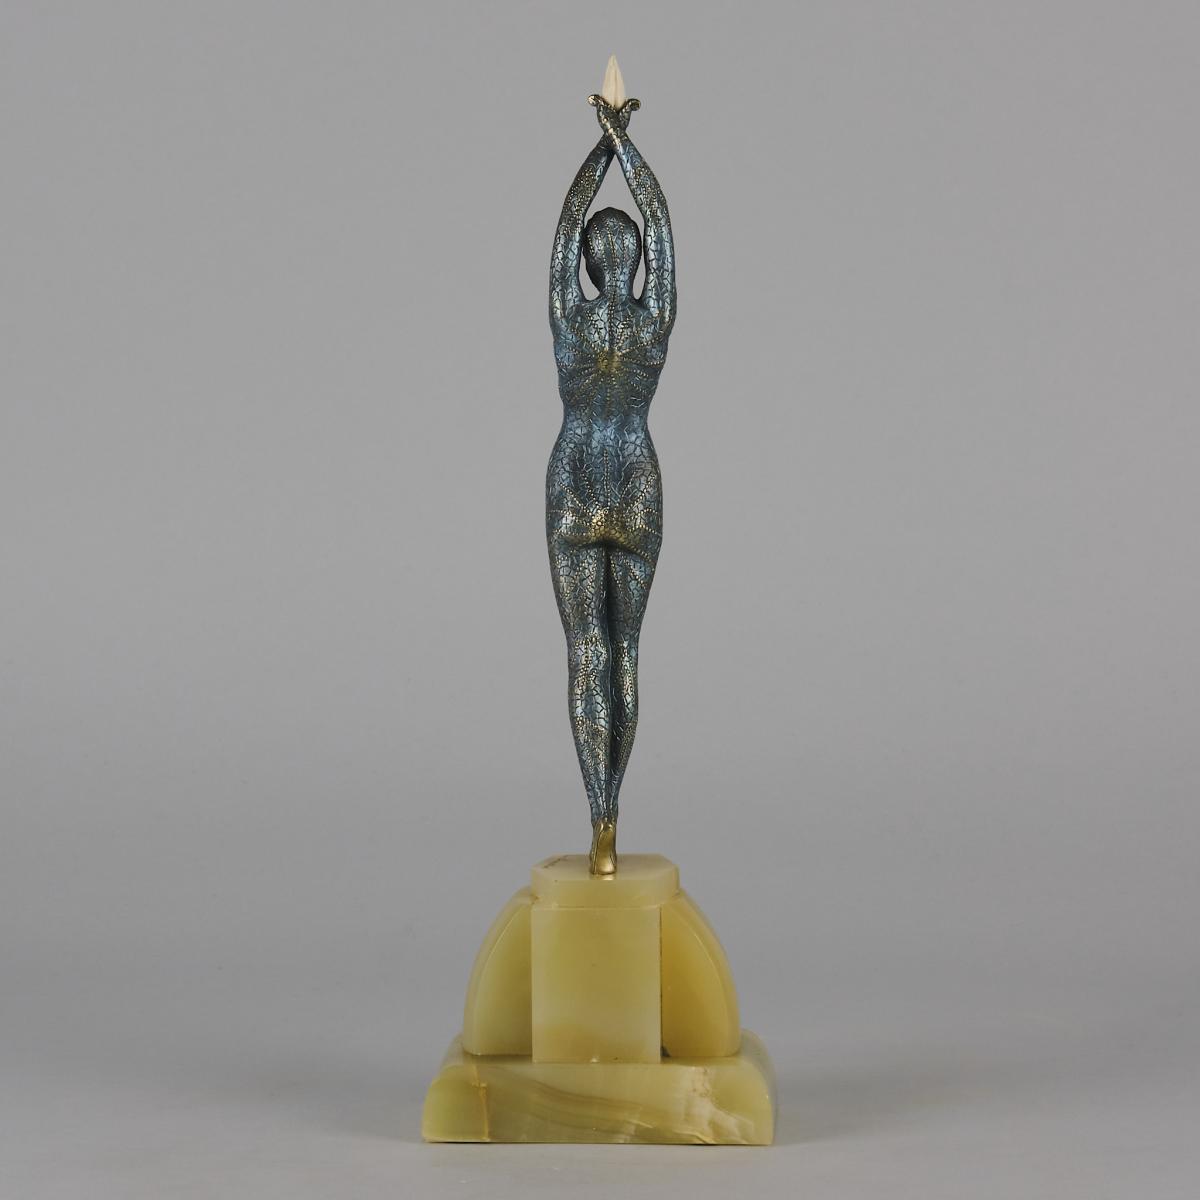 Art Deco bronze and Ivory sculpture entitled "Starfish" by Demetre Chiparus Circa: 1925